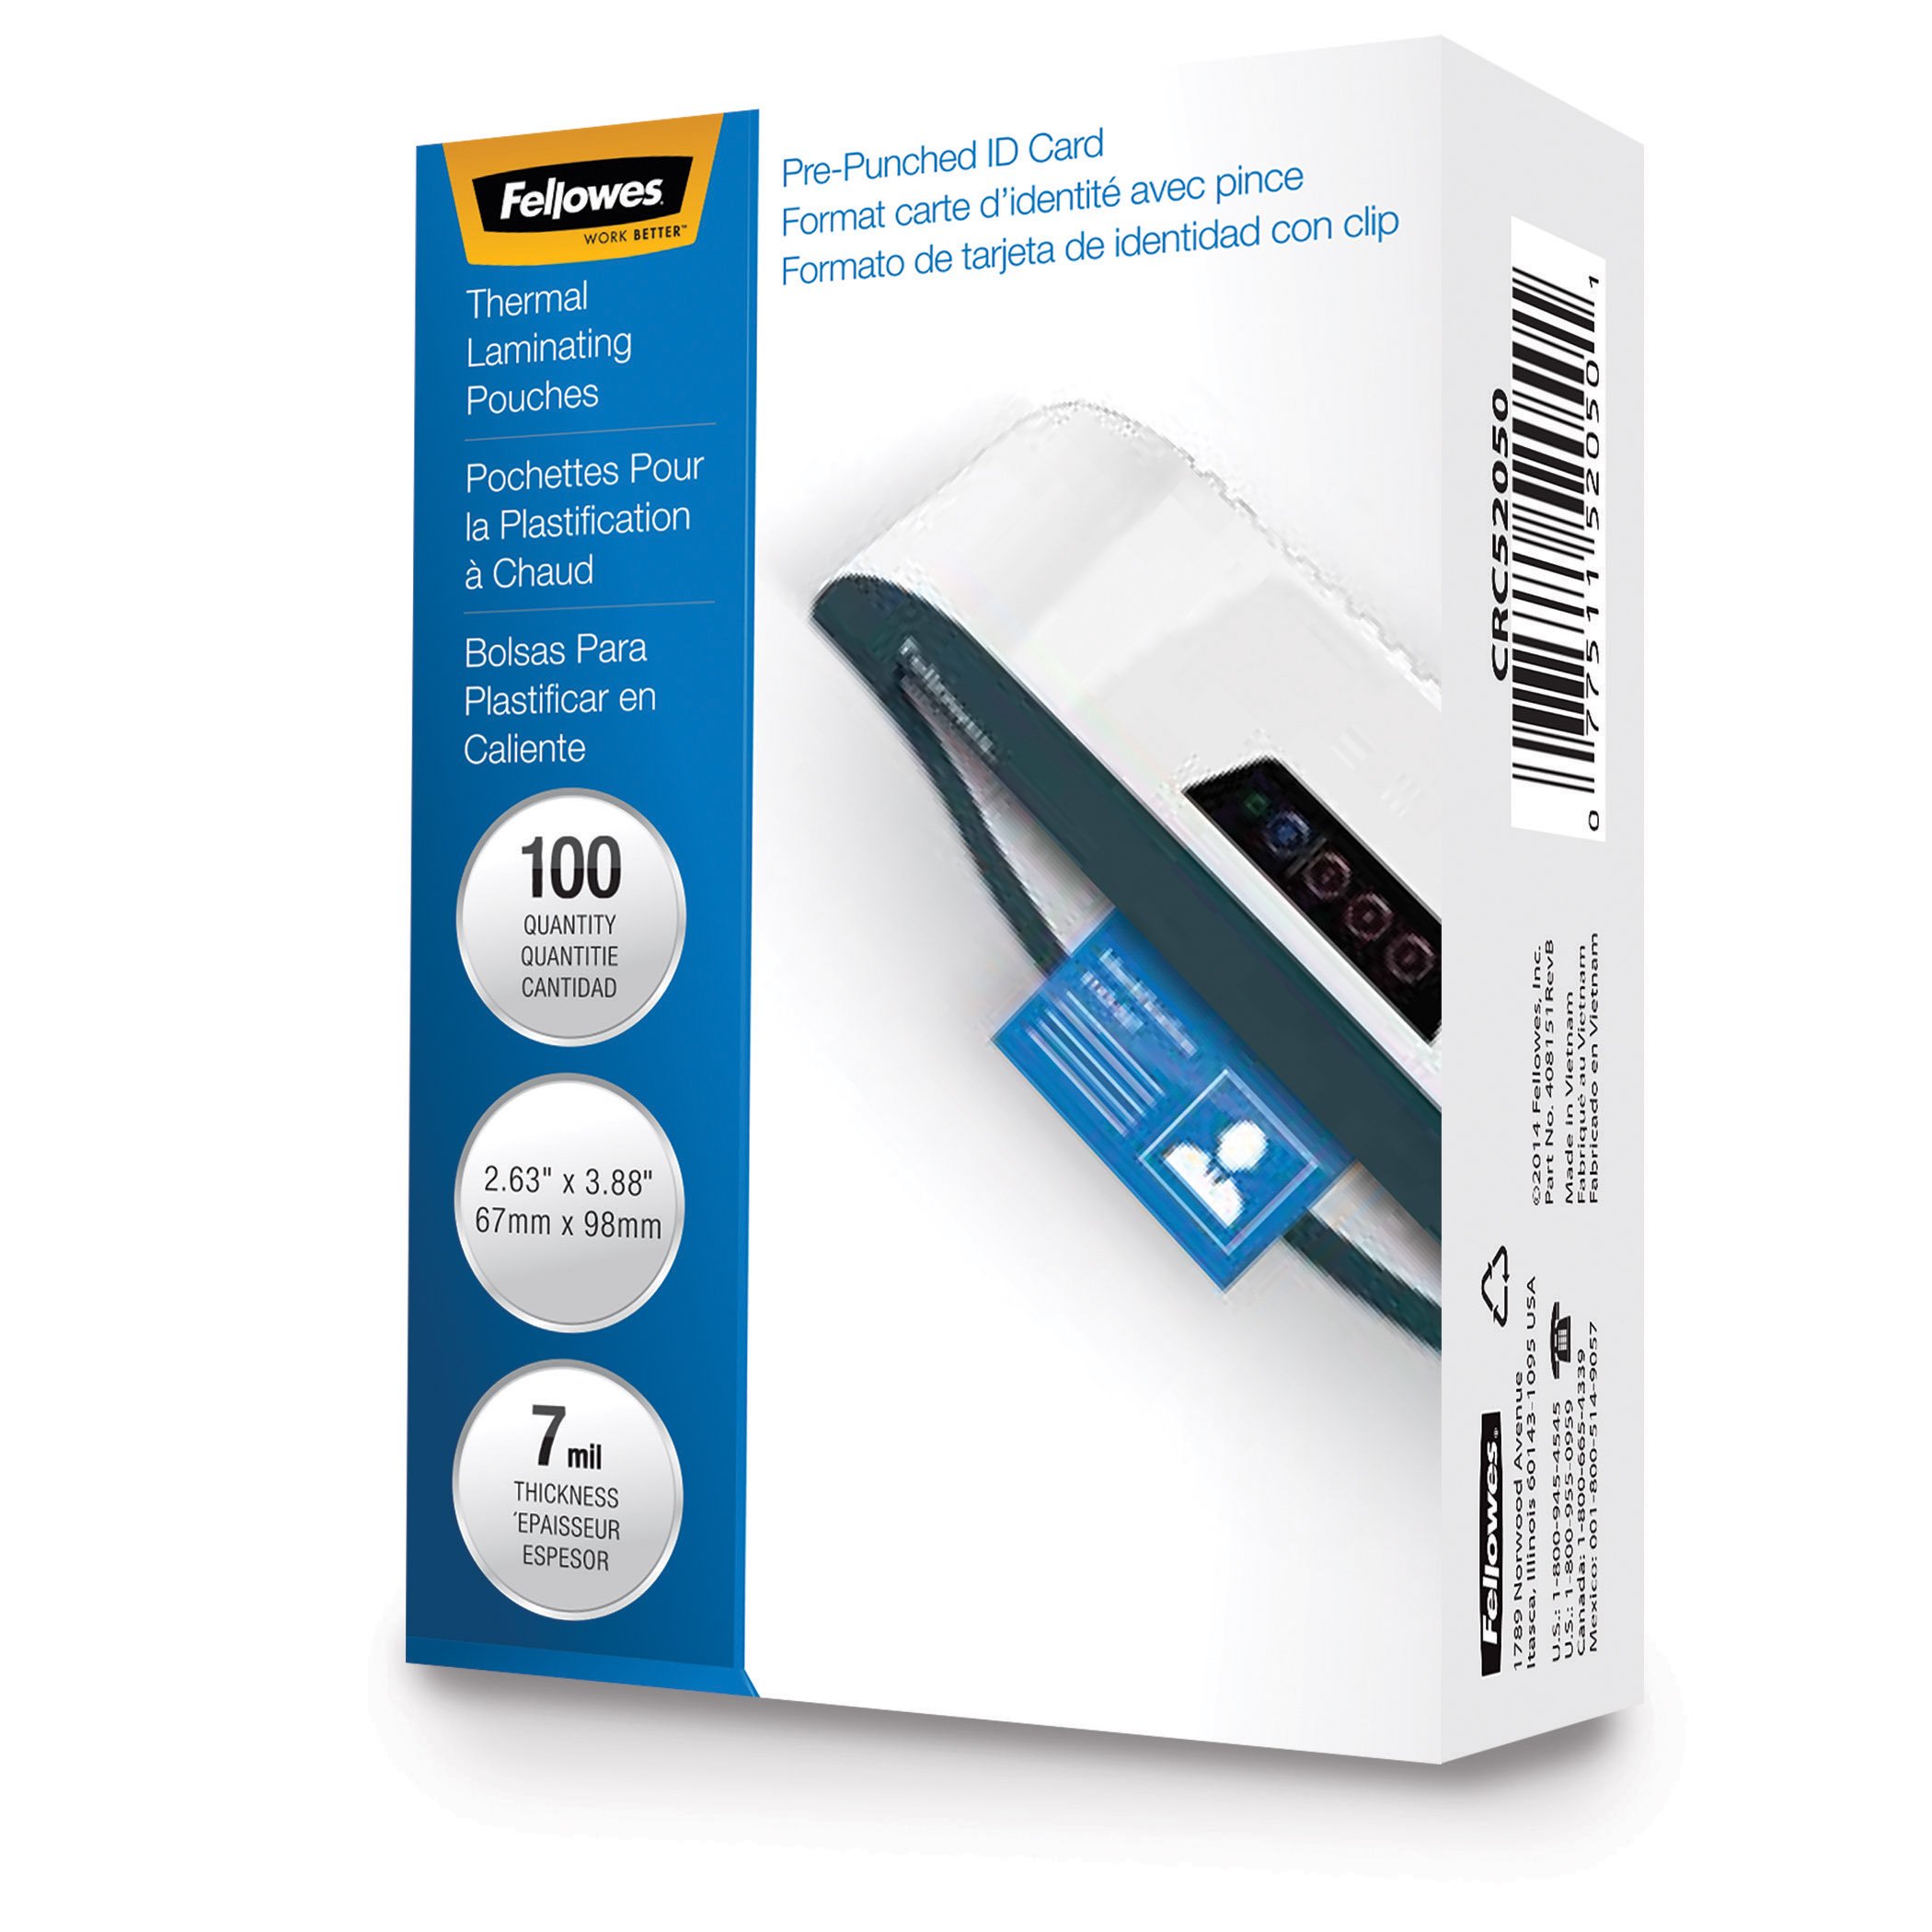 Fellowes 52050, Glossy Pouches - ID Tag punched, 7 mil, 100 pack